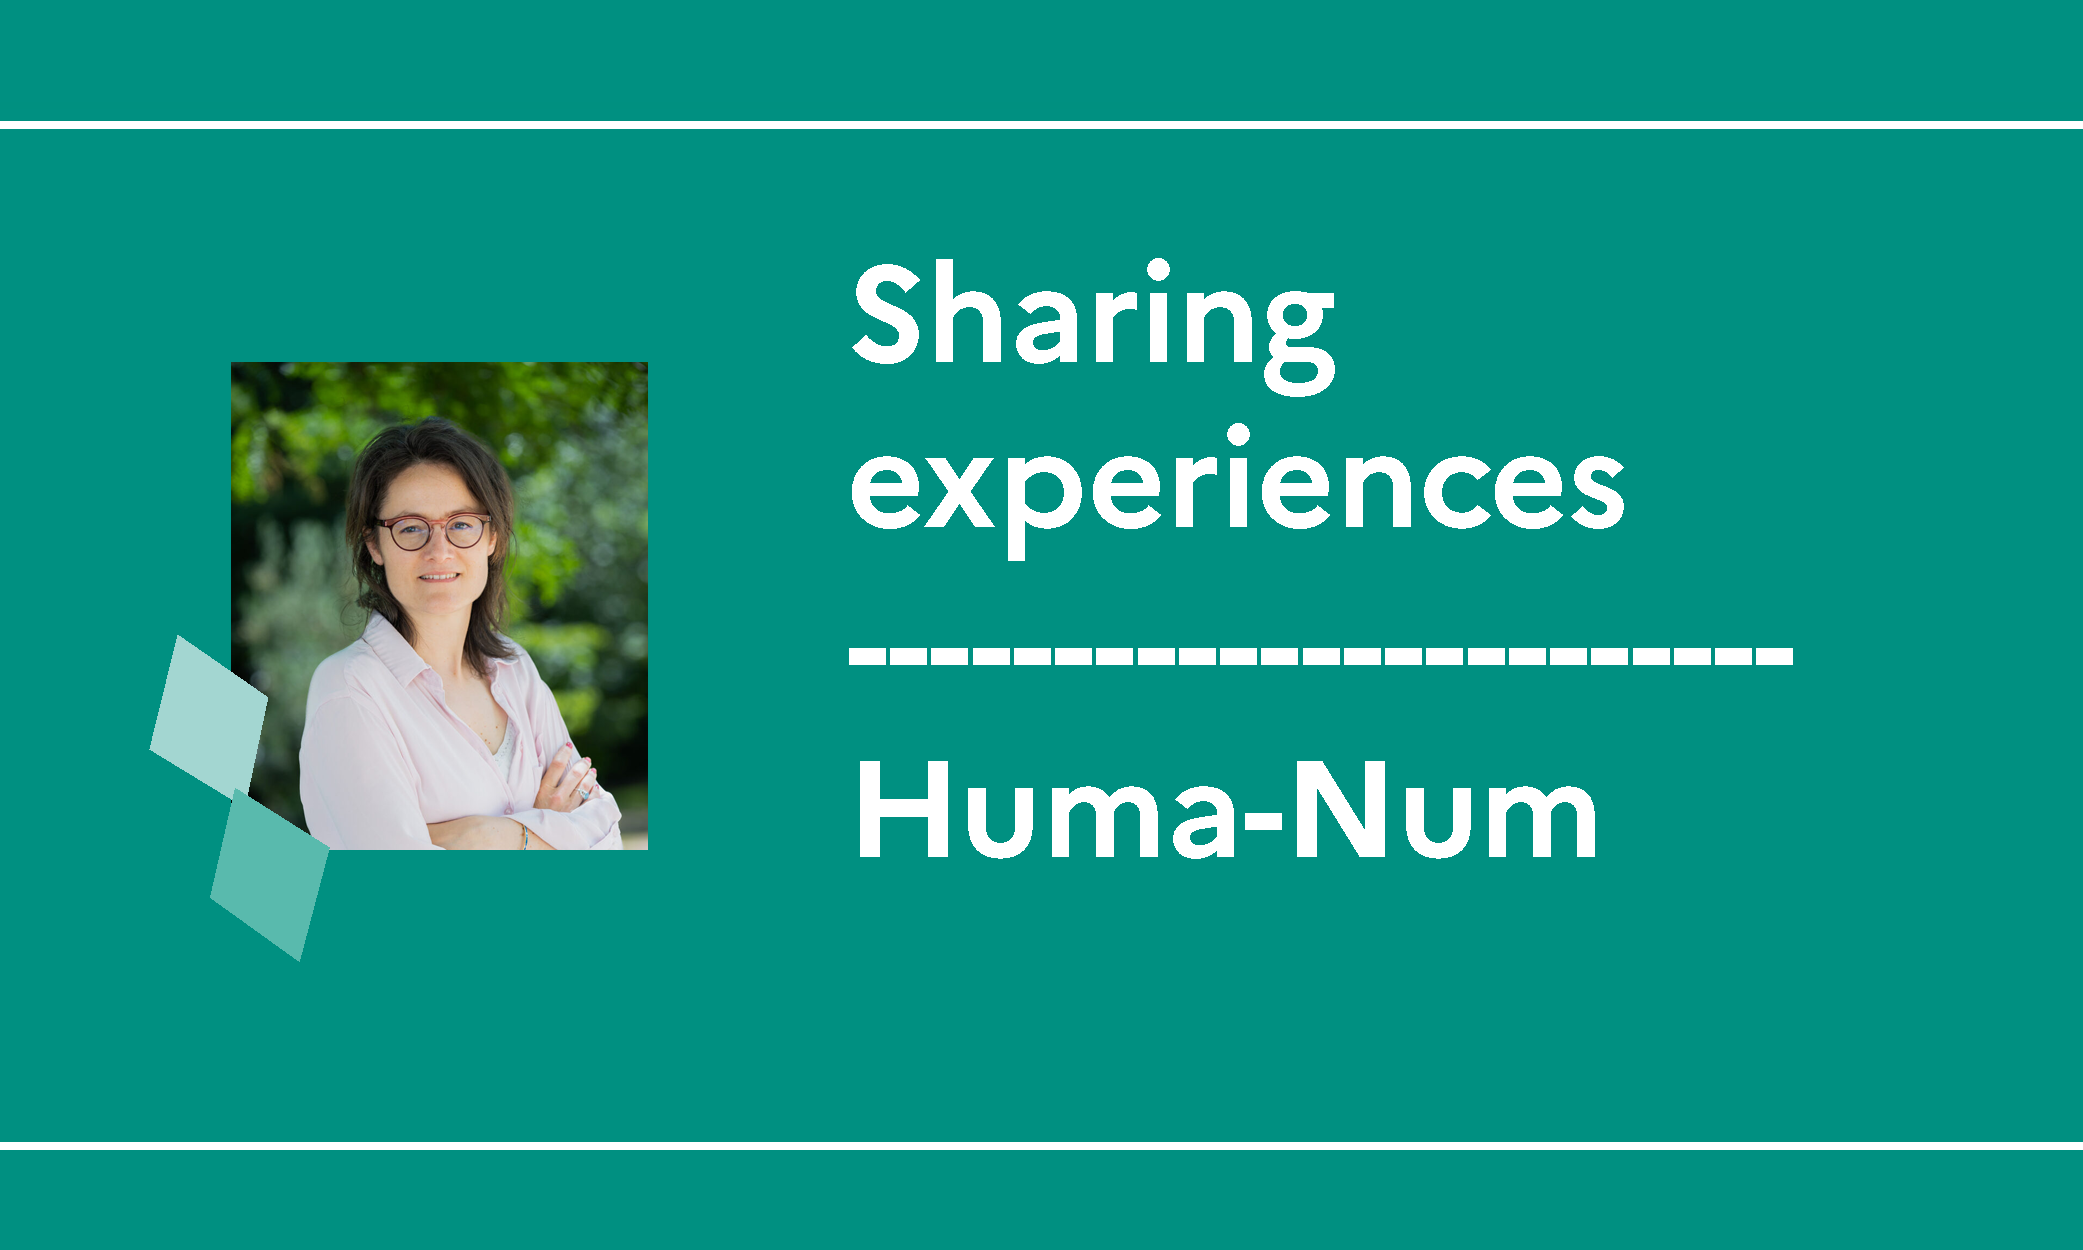 Huma-Num, an IR* research infrastructure for the Humanities and Social Sciences